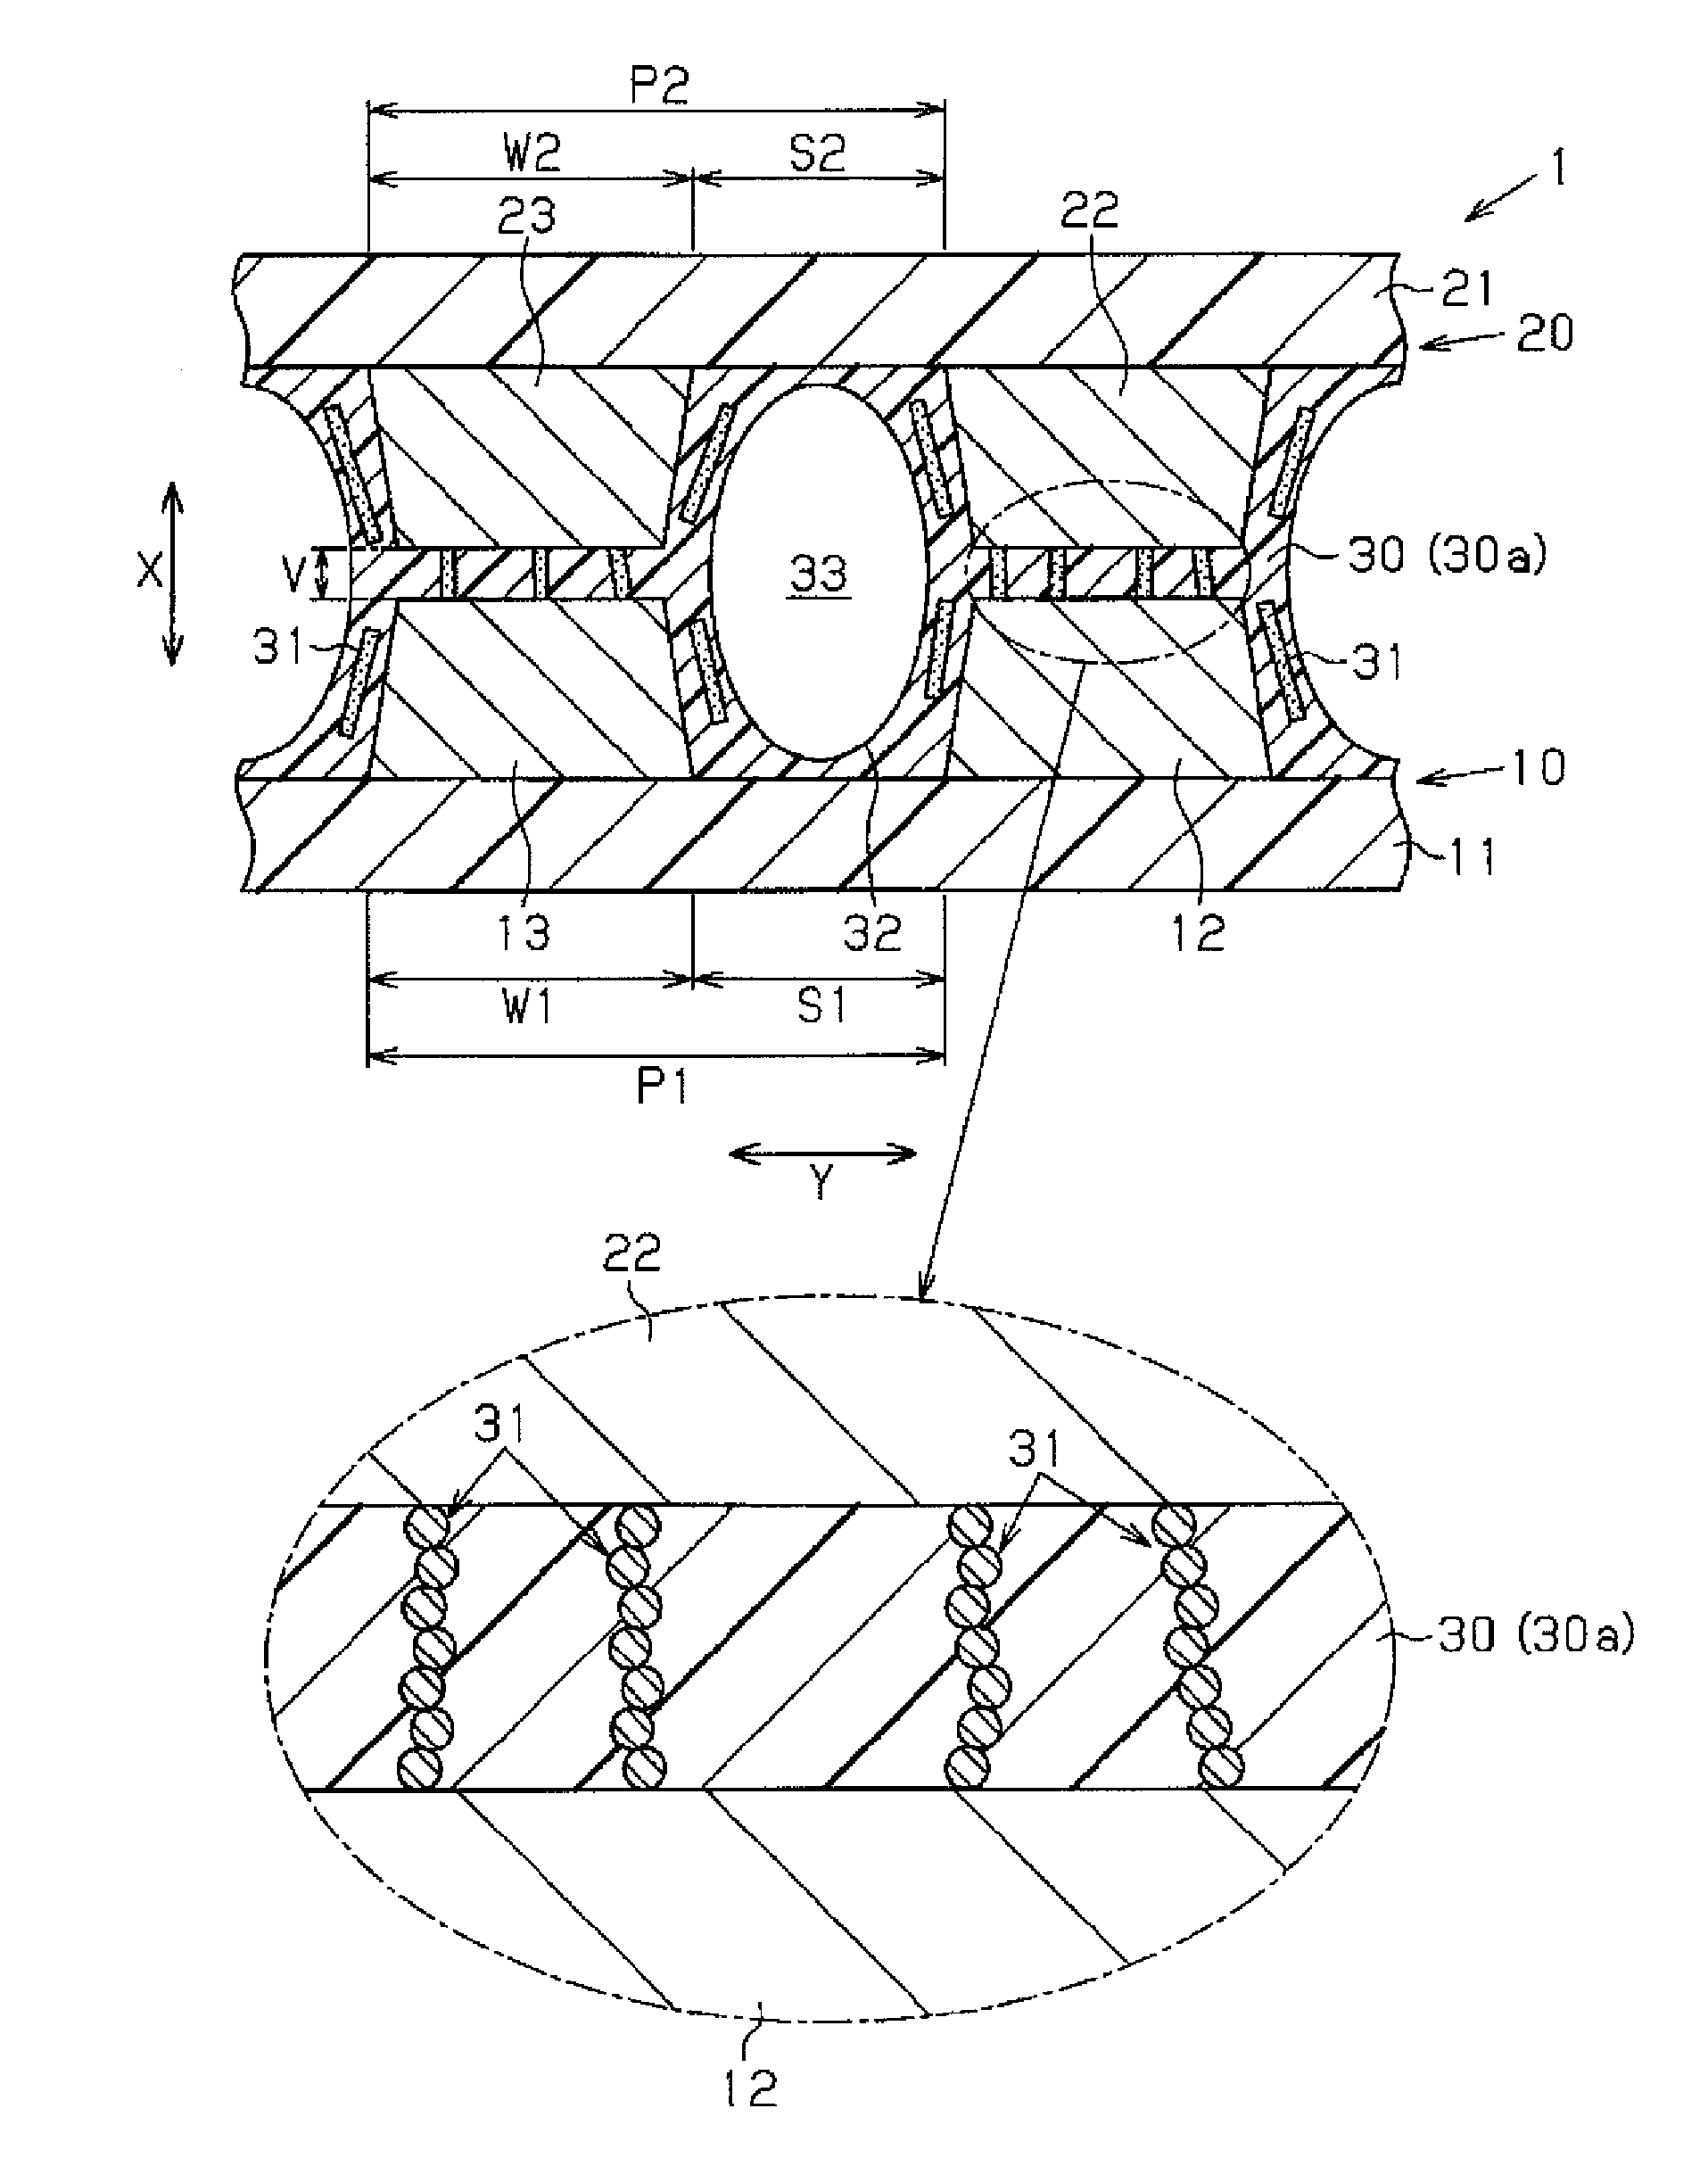 Structure of connecting printed wiring boards, method of connecting printed wiring boards, and adhesive having anisotropic conductivity